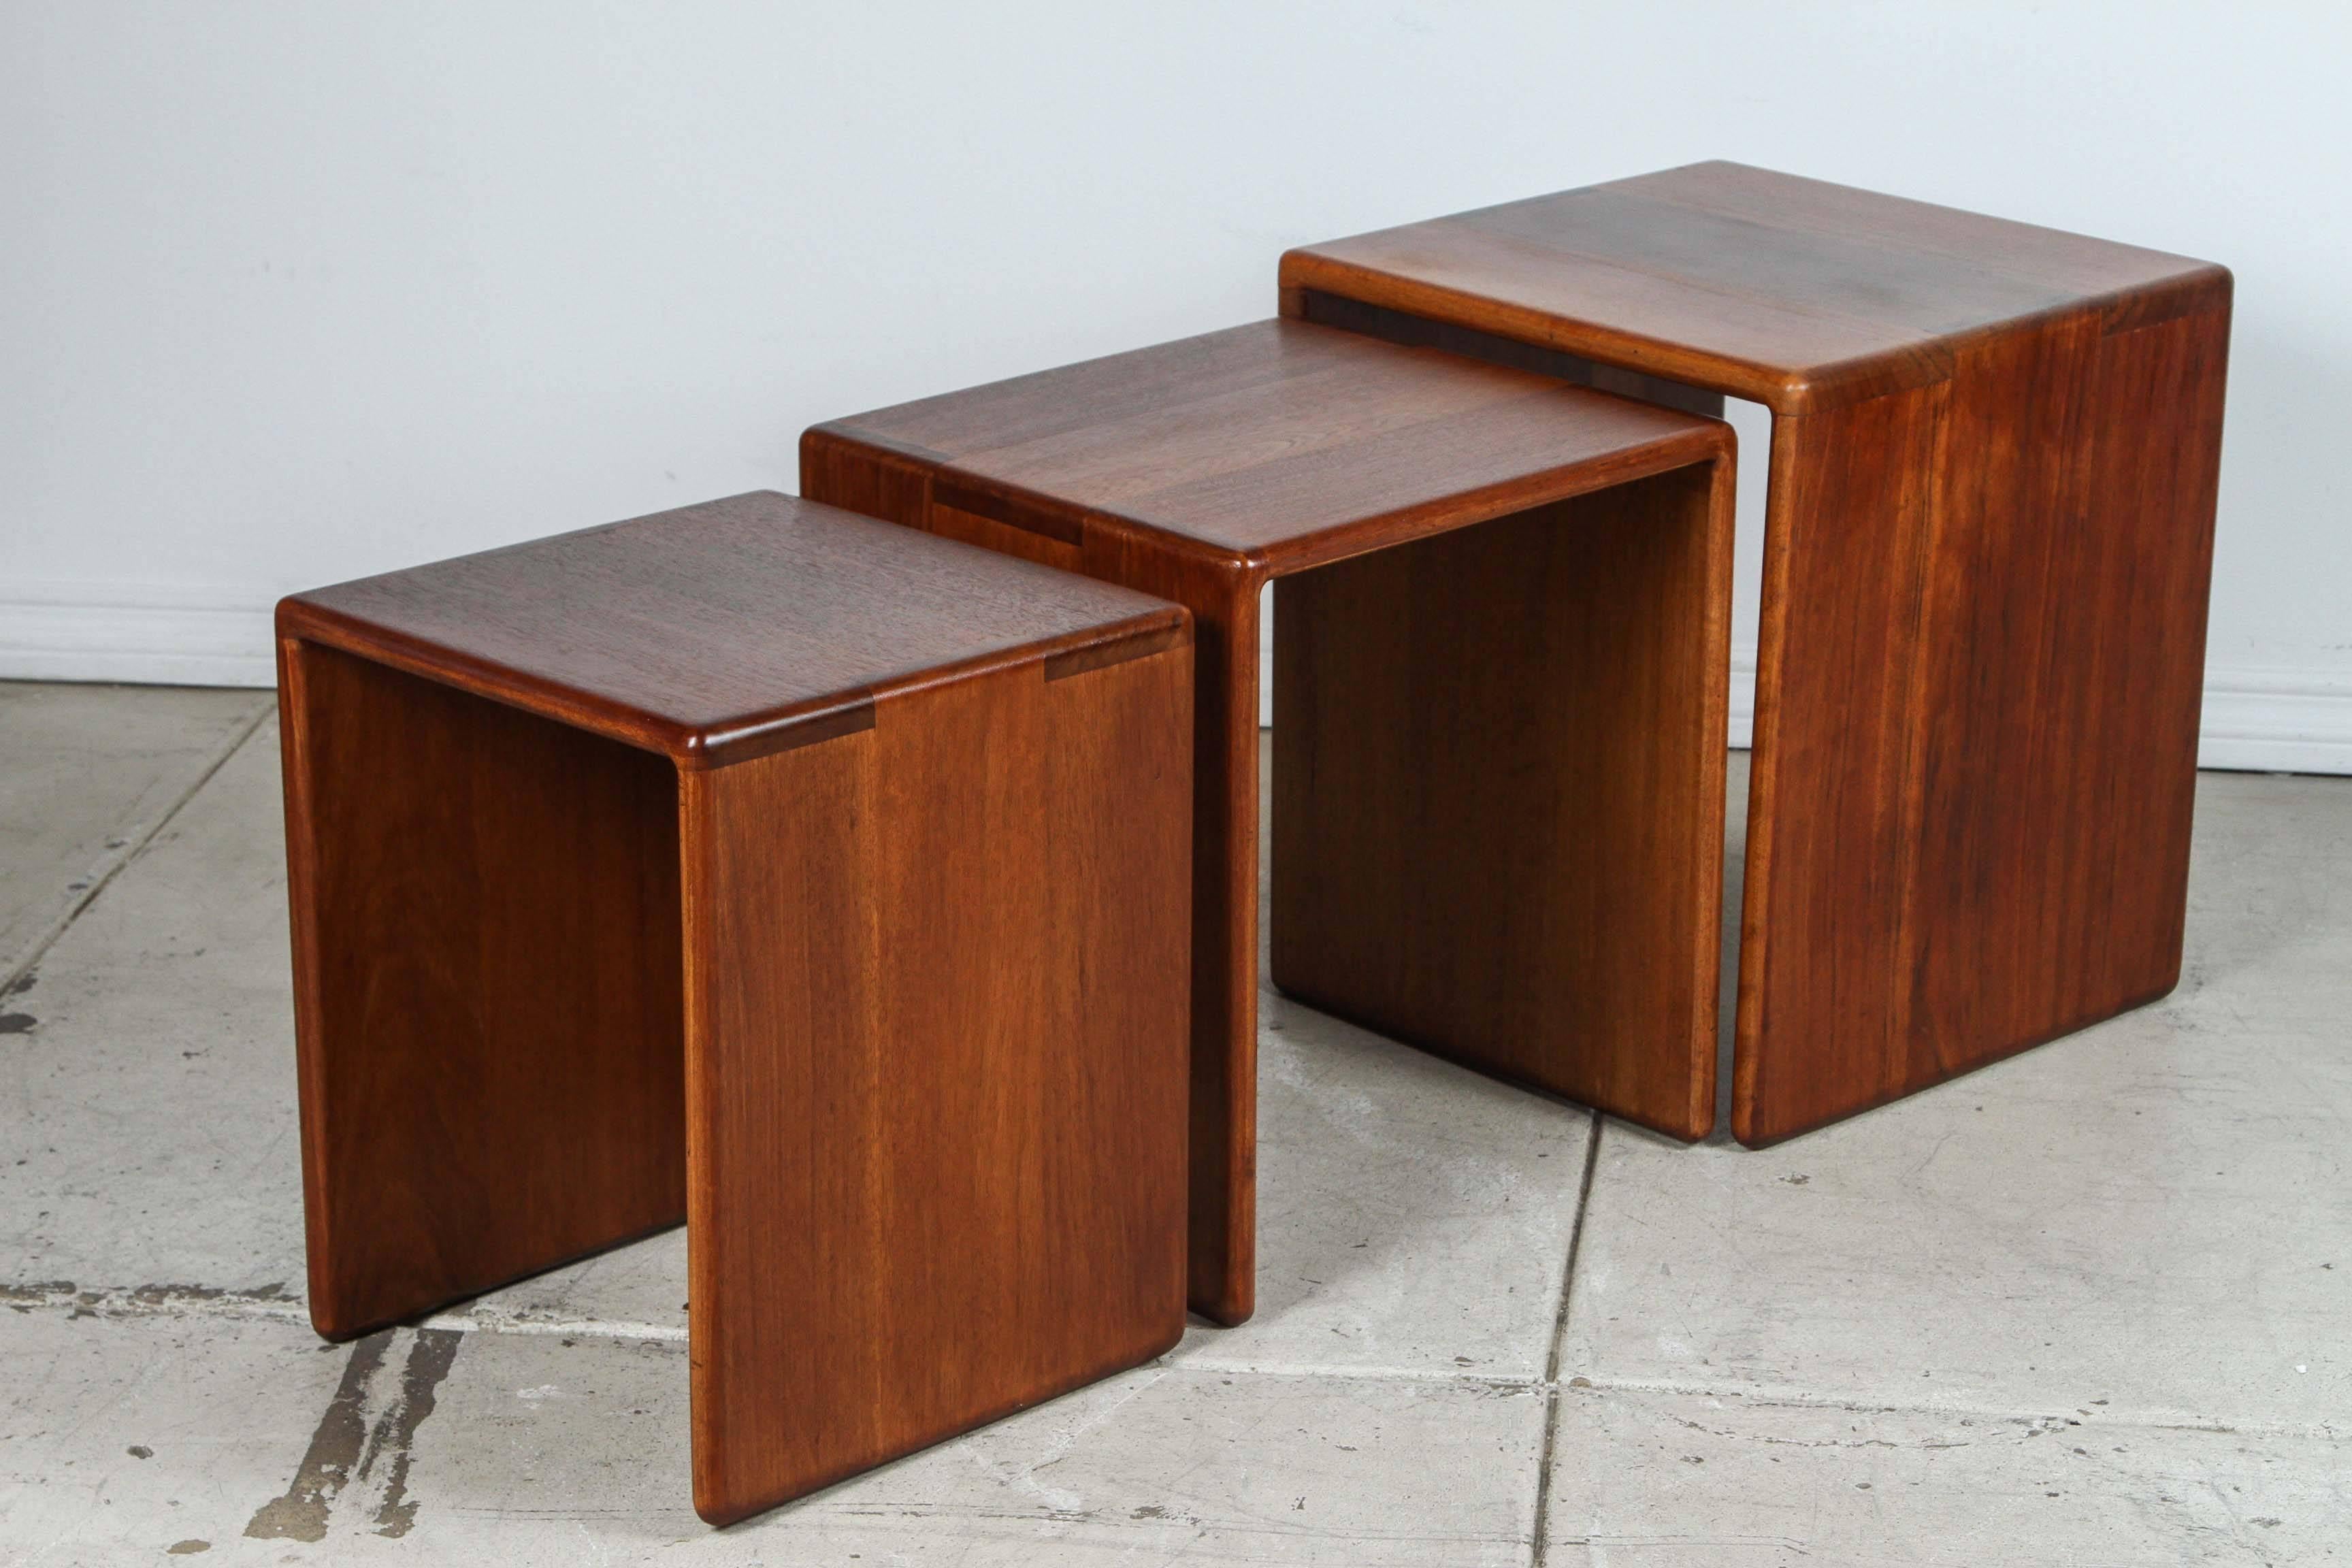 A beautiful set of Gerald McCabe nesting tables for the Orange Crate Modern line by Eon Furniture, California. This set can either serve as three individual tables or as one table. The tables are in great condition.

Individual dimensions:

17